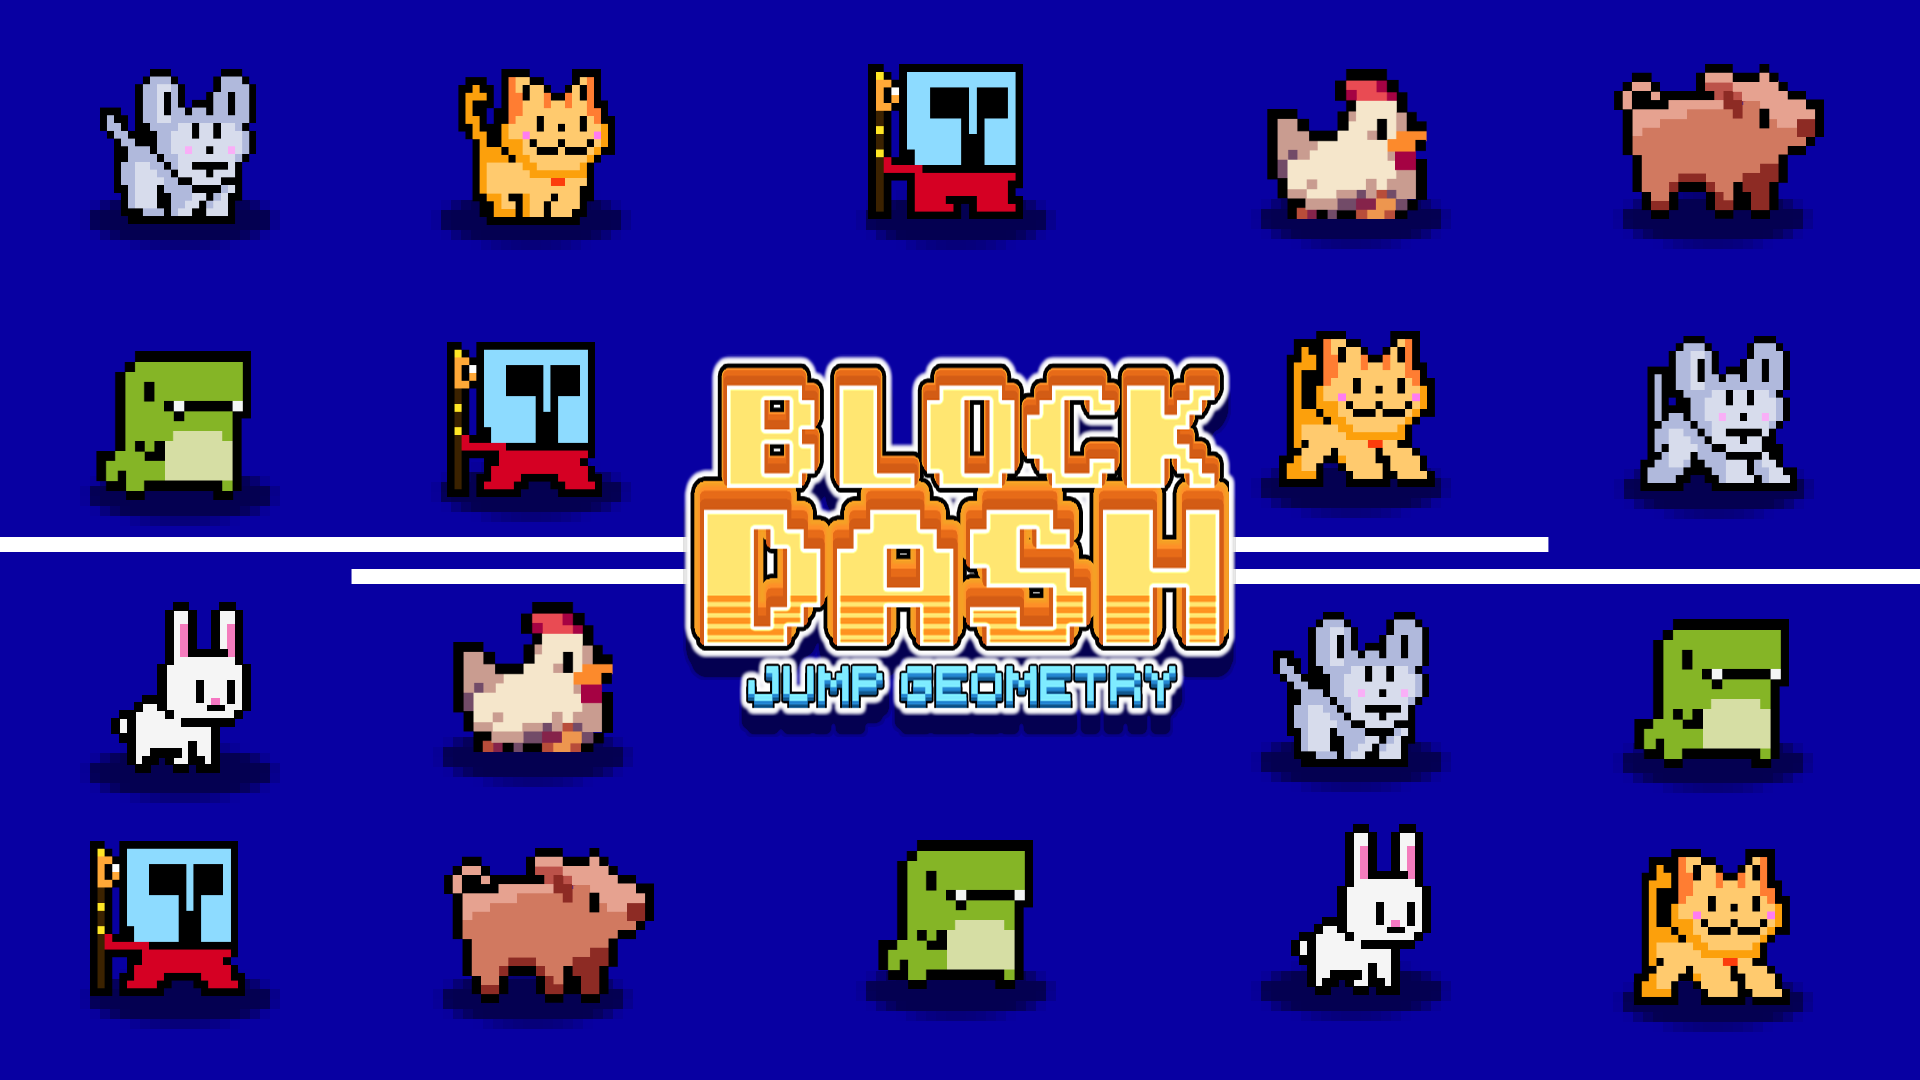 Block Dash mobile android iOS apk download for free-TapTap